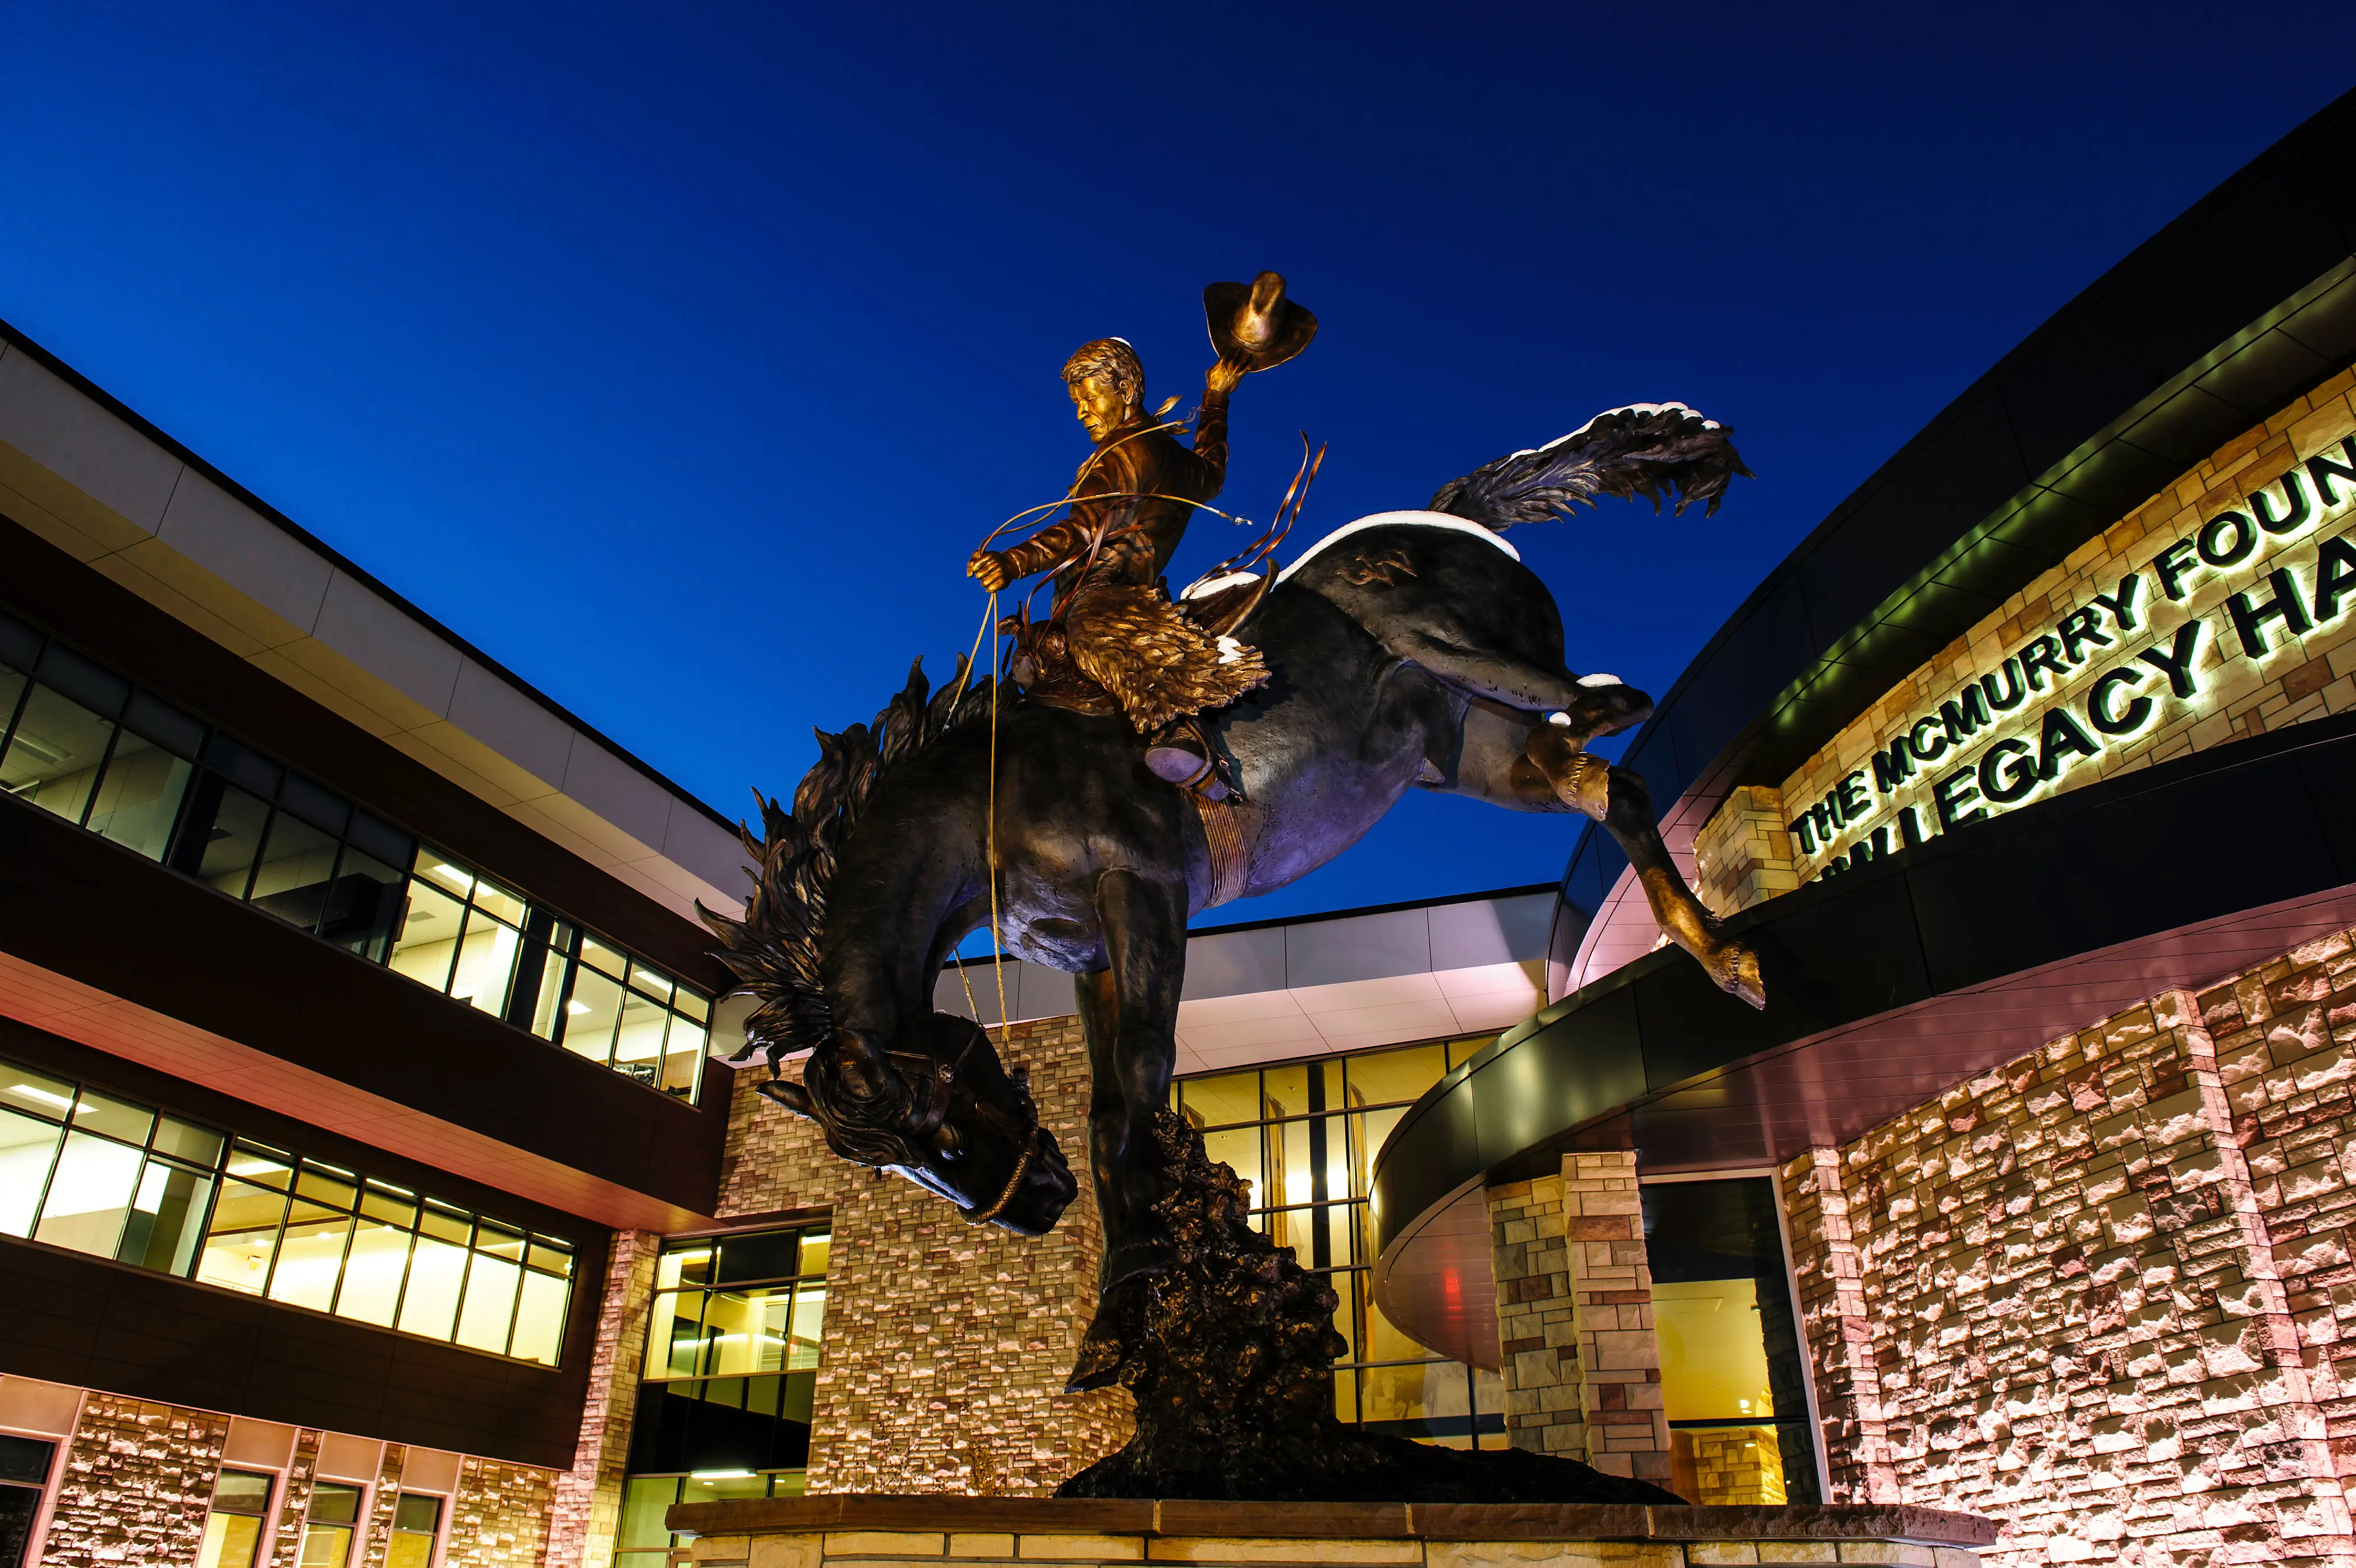 Statue at the University of Wyoming